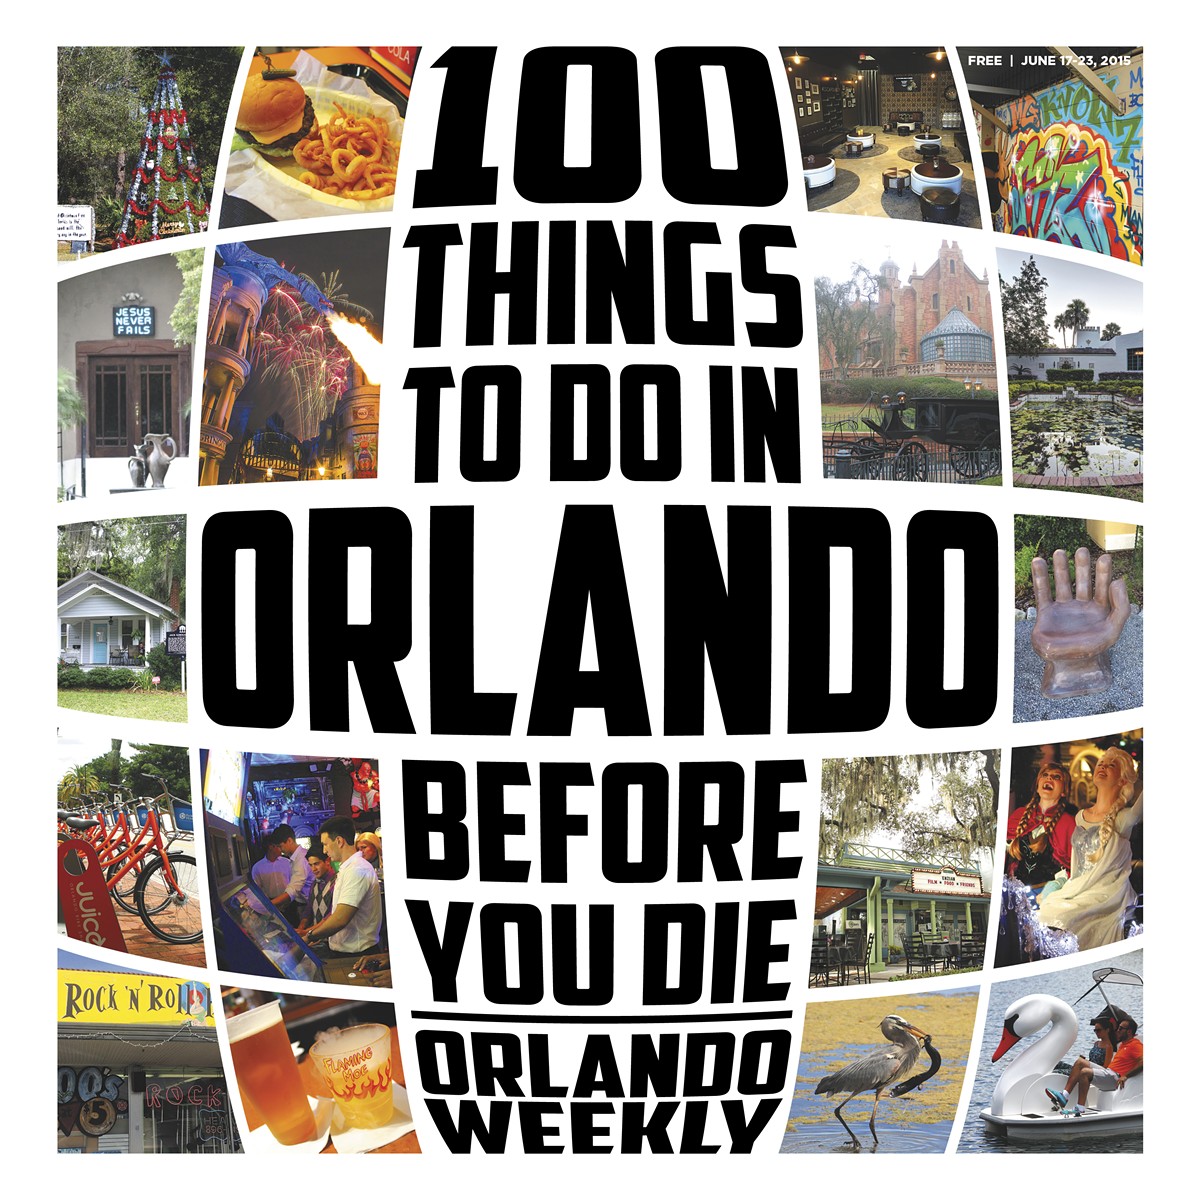 100 things to do in Orlando before you die (updated for 2015)